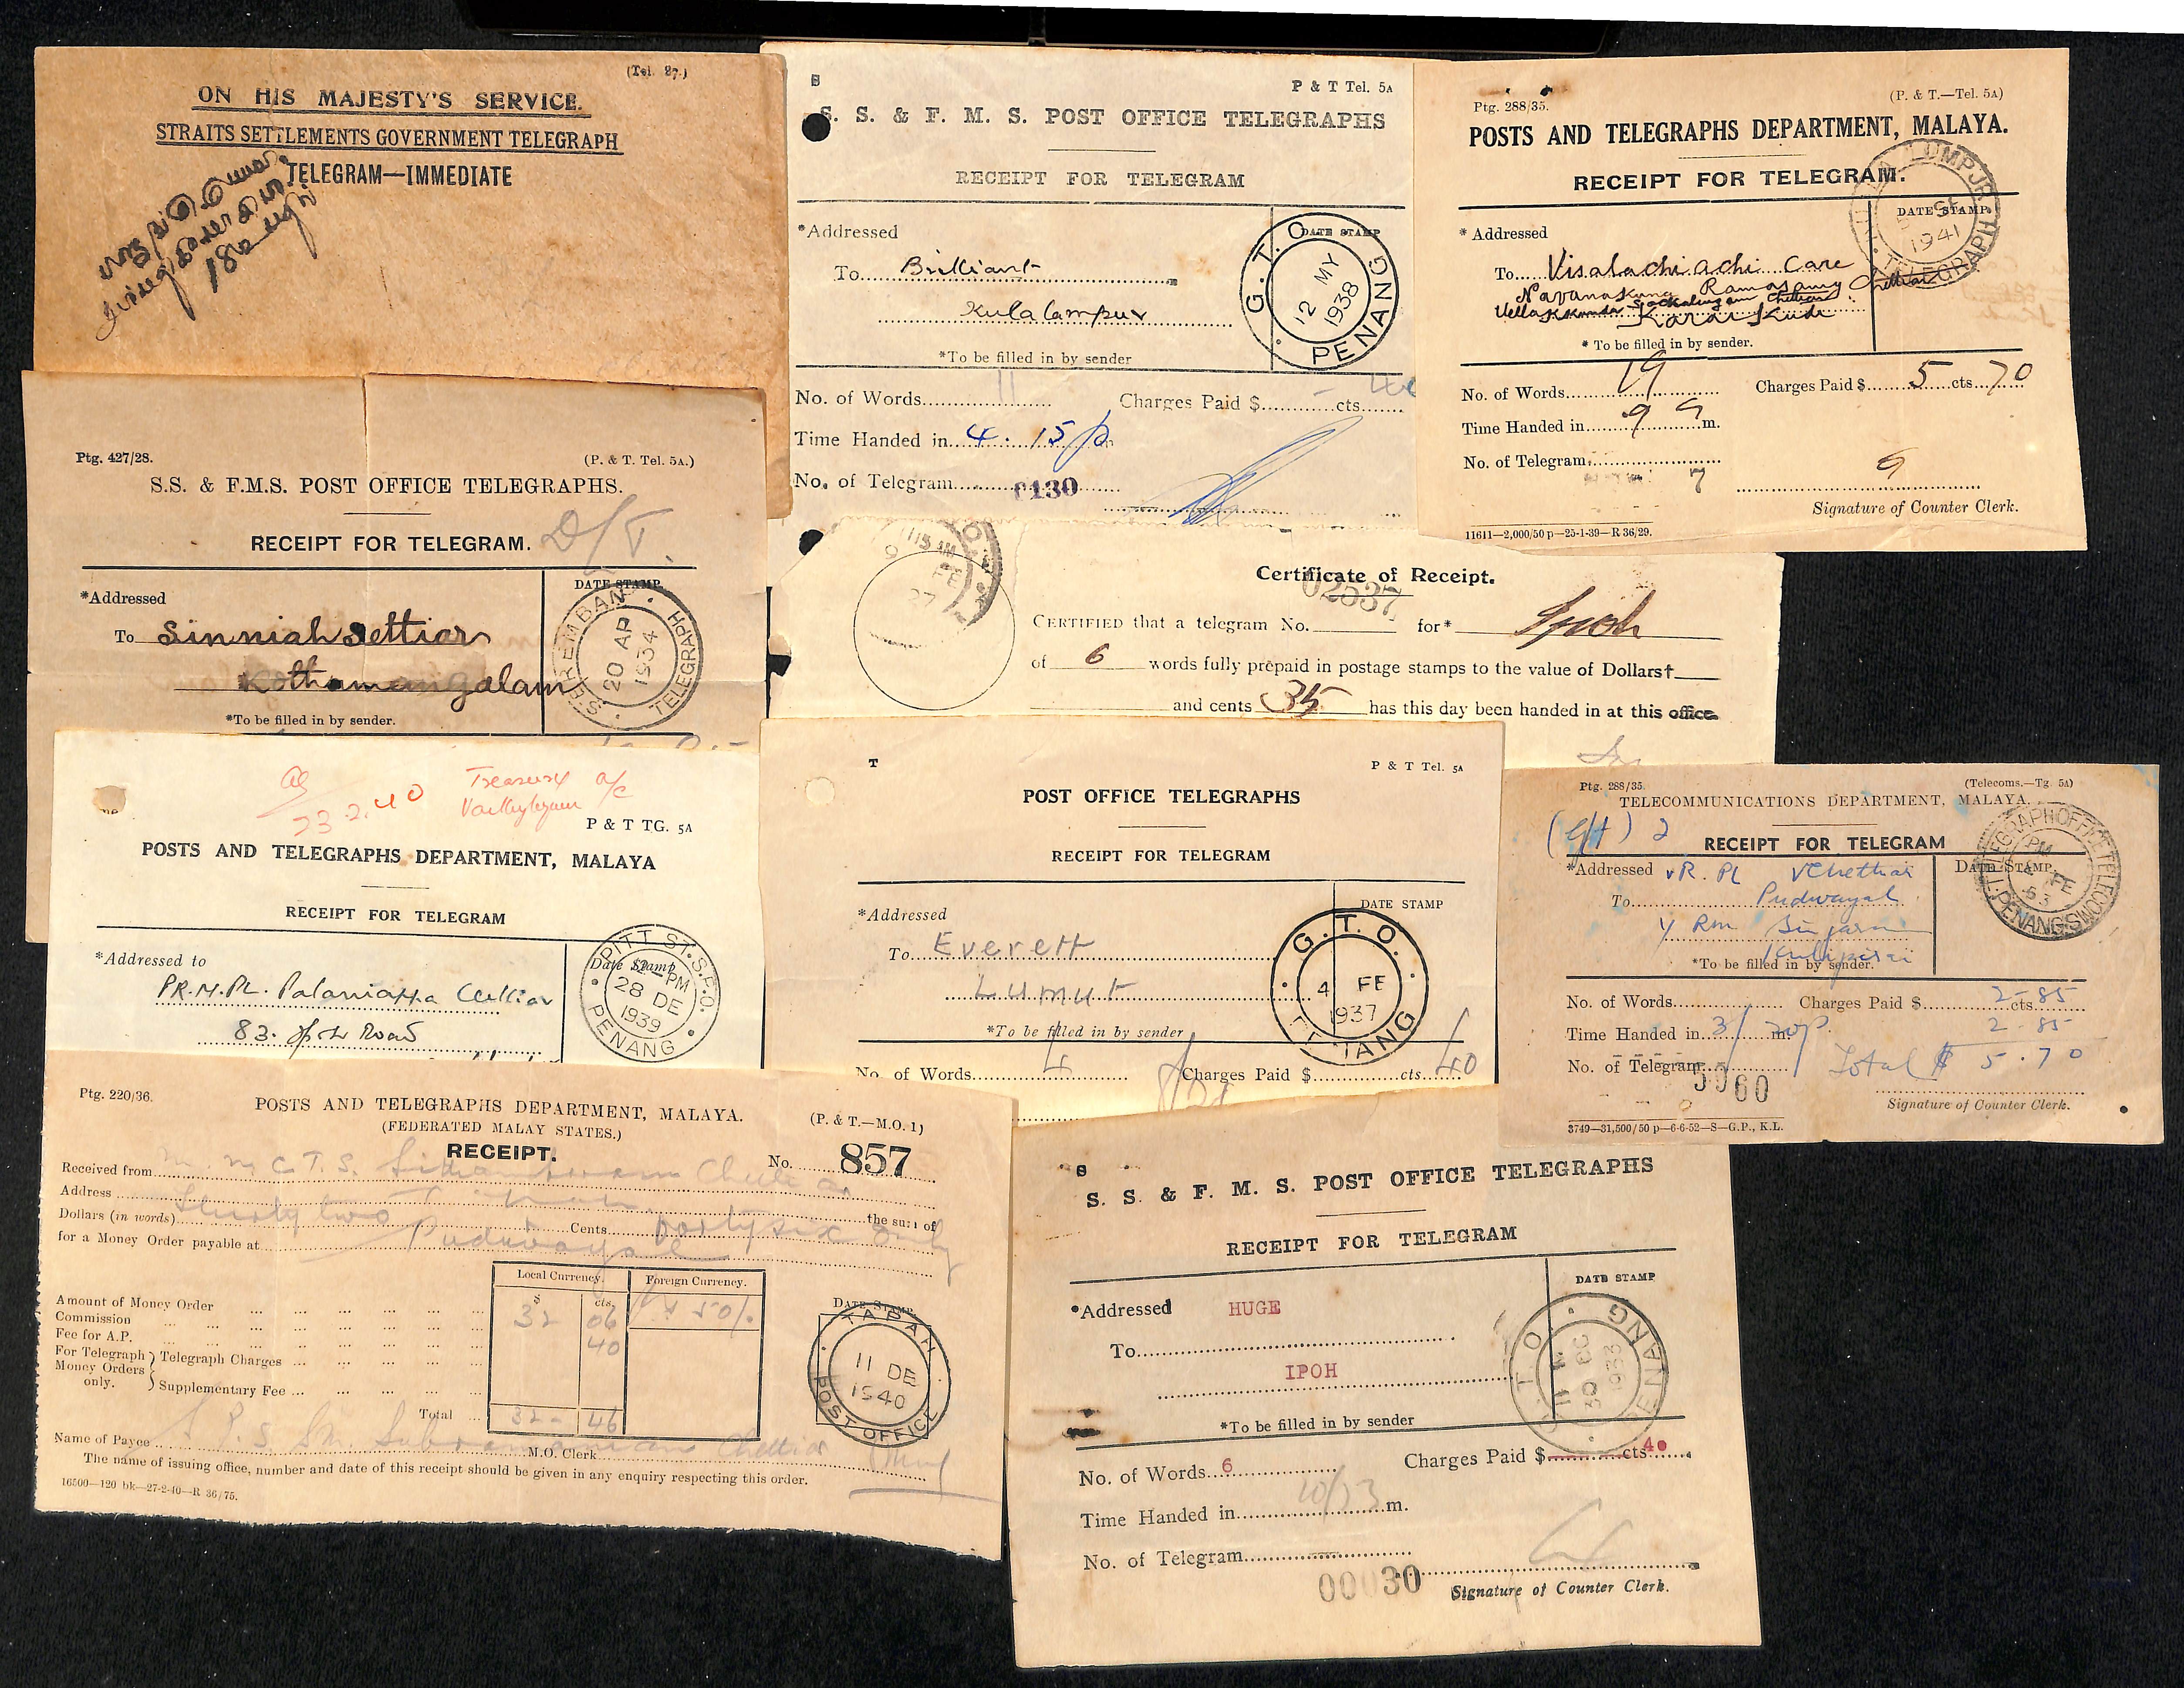 Telegrams. 1925-48 Telegram forms (21) and envelopes (16), mainly Straits but some from Johore, F.